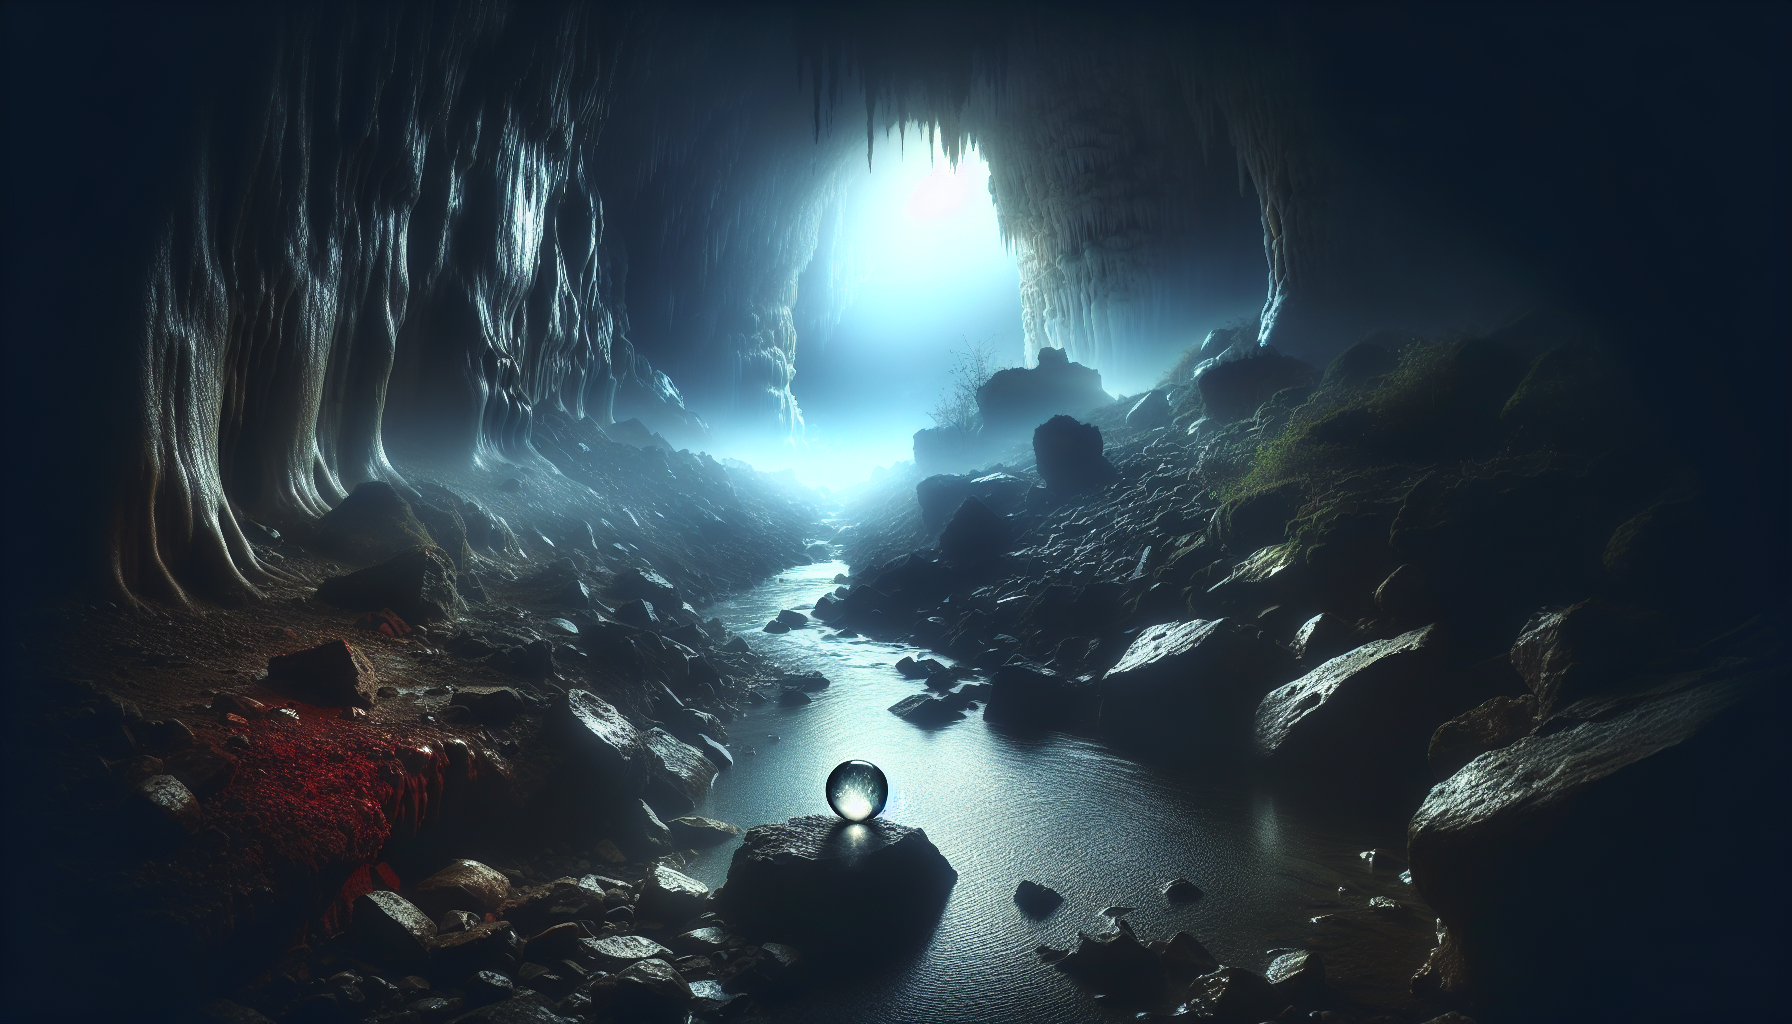 Can You Share Insights Into Secret Caves Or Underground Rivers Awaiting Exploration?